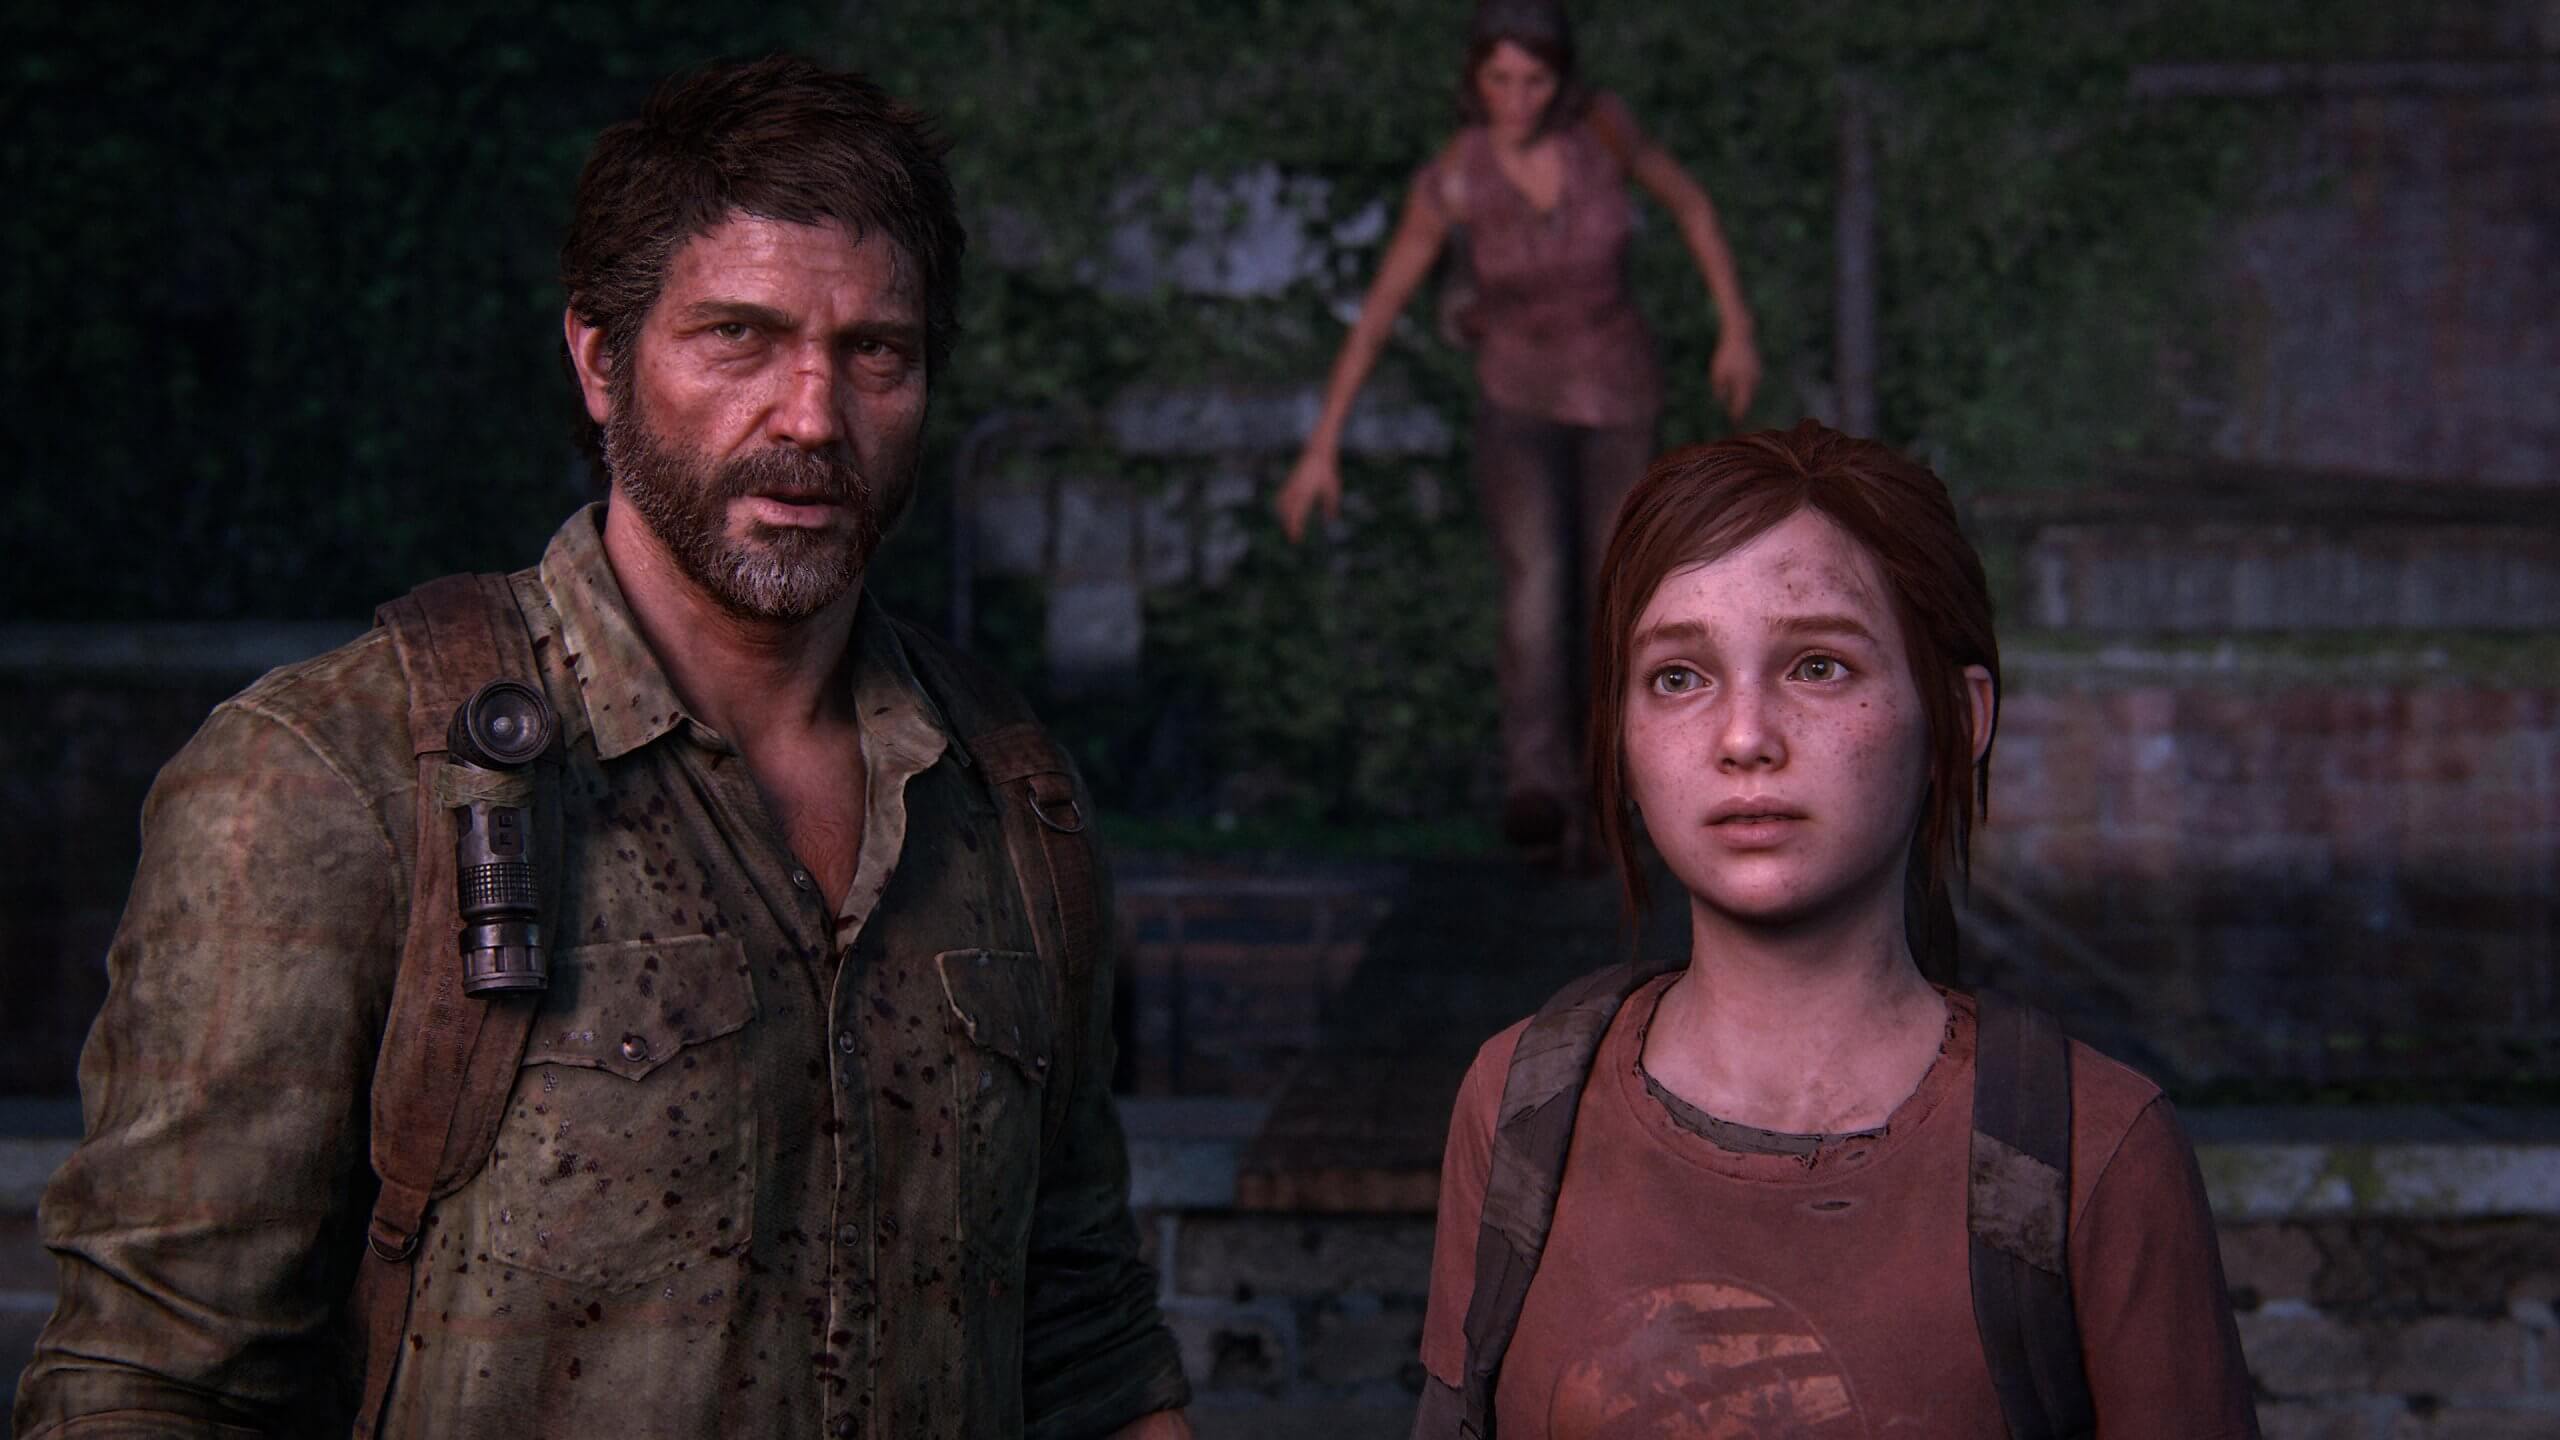 The Last of Us Part 1 Patch 1.0.4 Tested - Improved Performance